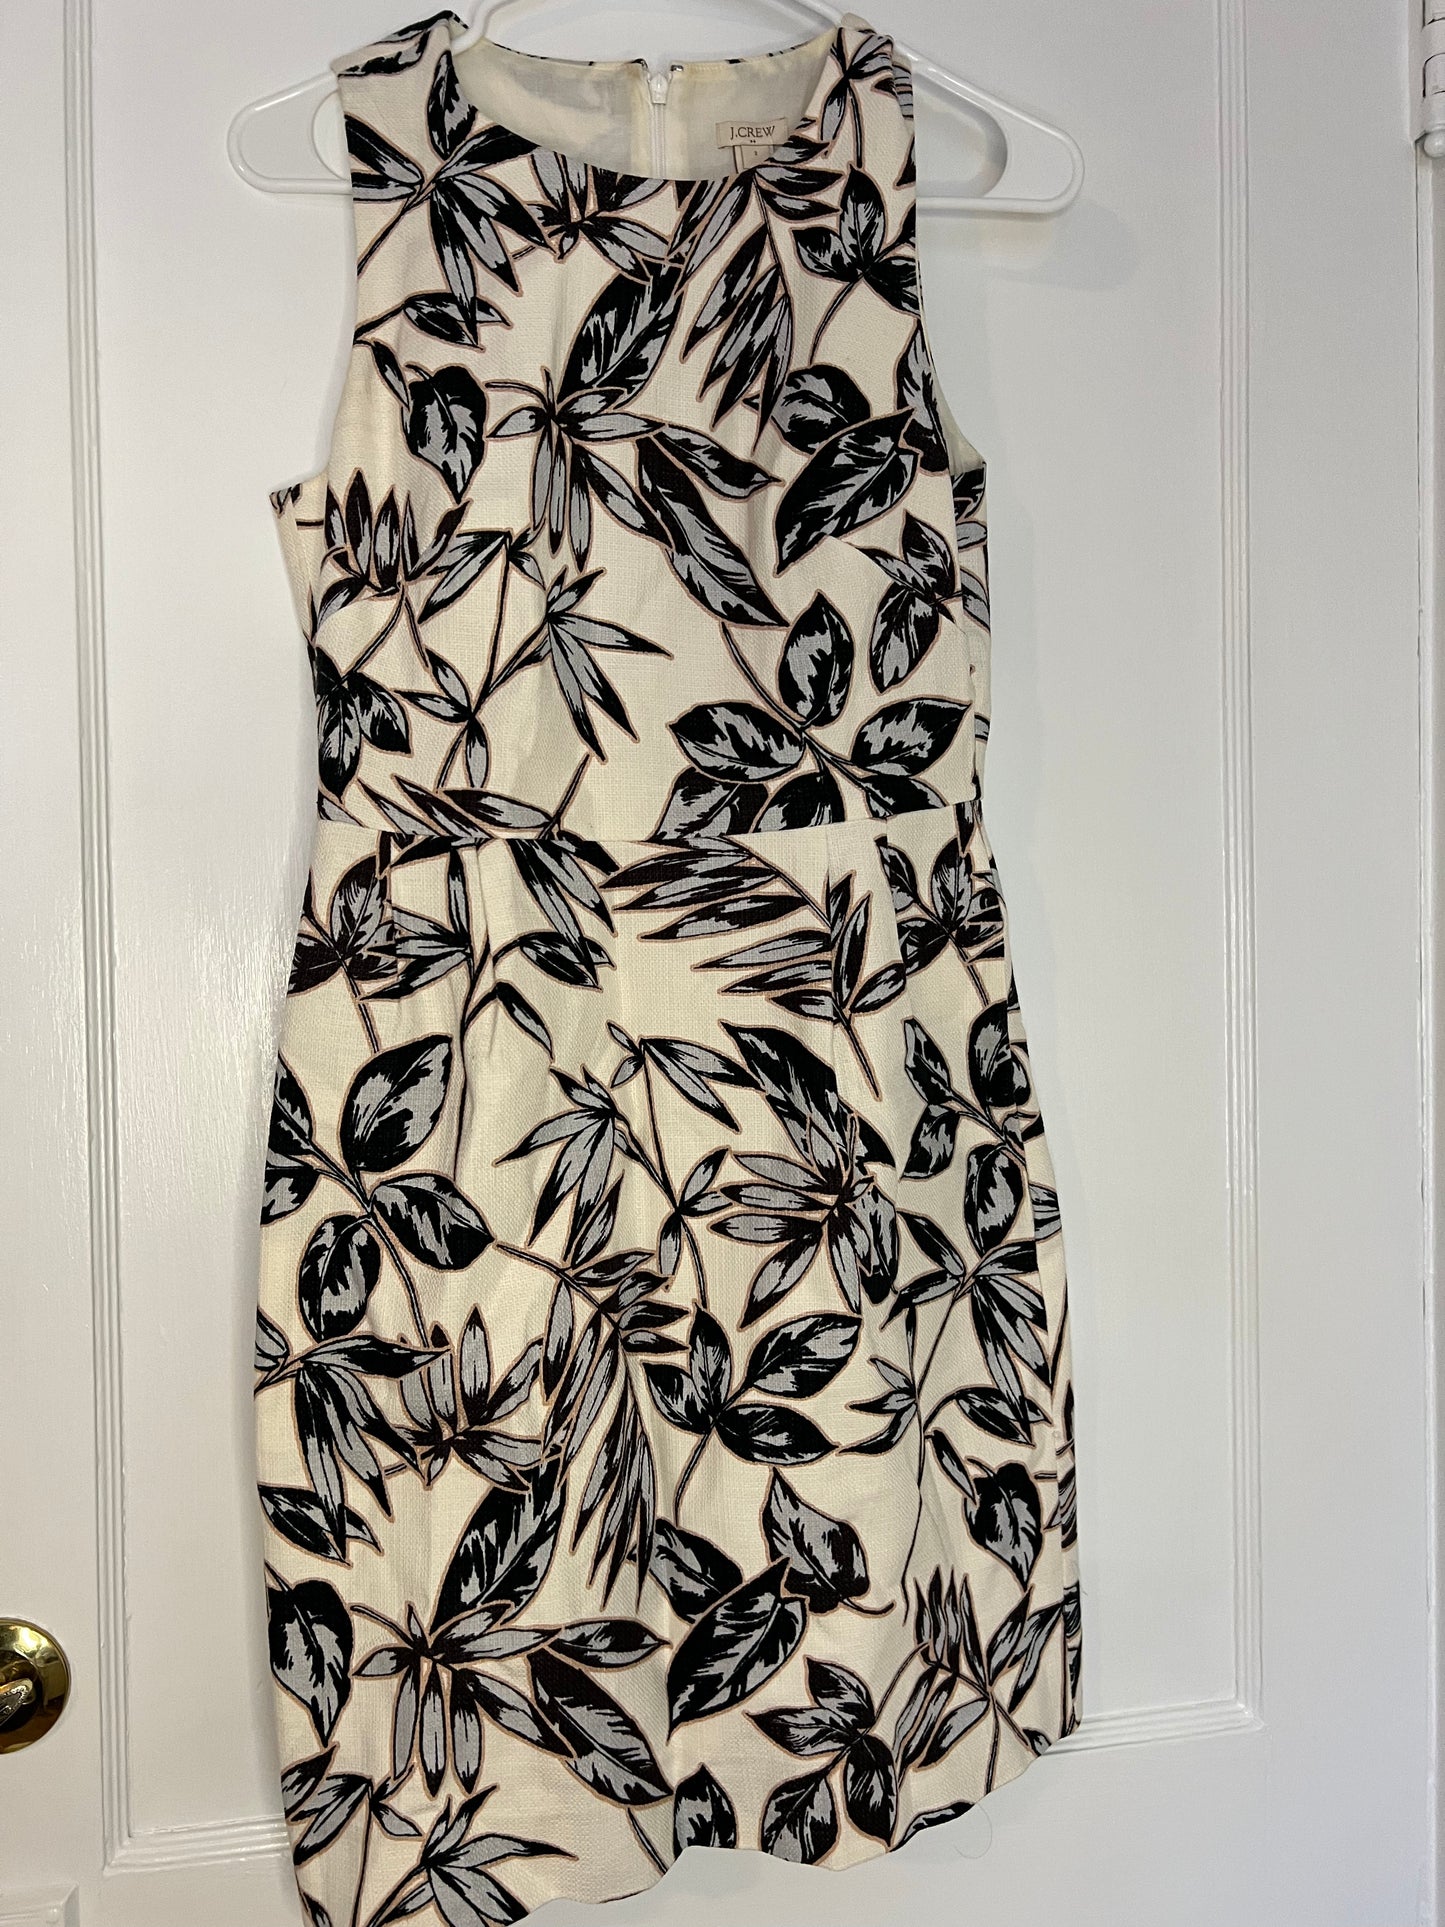 JCrew White Leaf Pattern Sleeveless Dress Size 2 New Without Tags PPU 45208 or Spring Sale